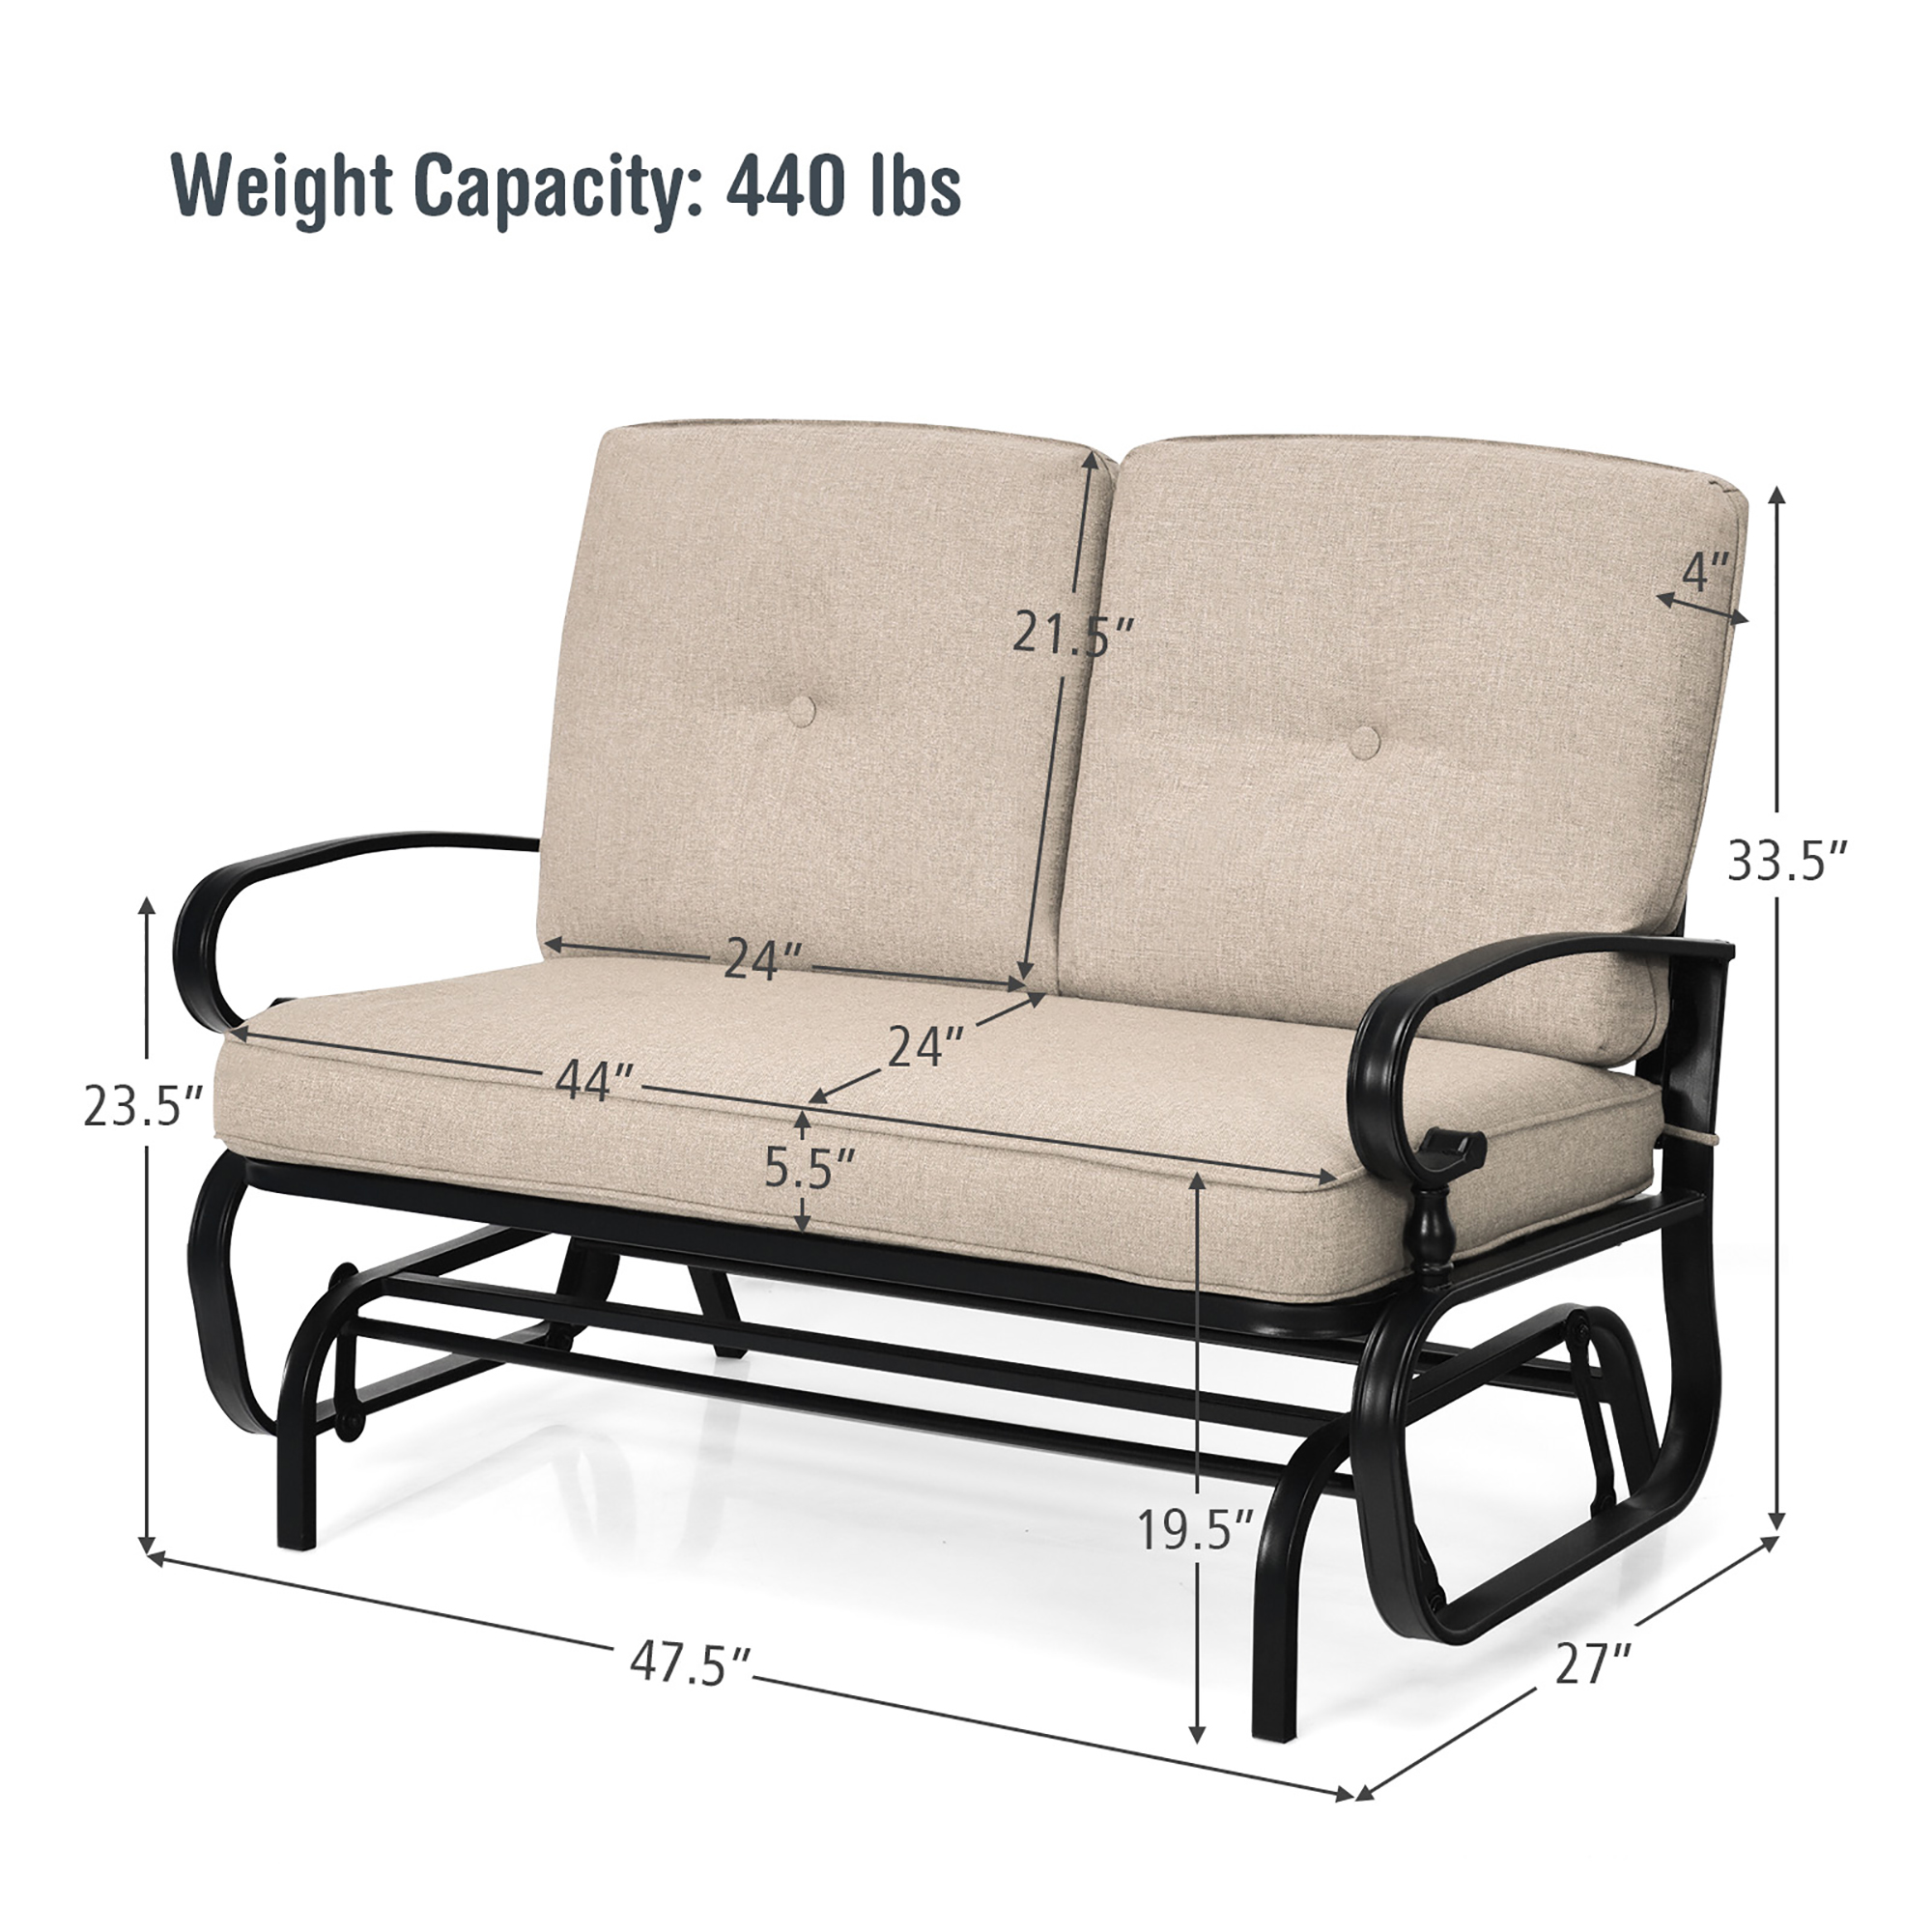 Costway 2-Person Outdoor Swing Glider Chair Bench Loveseat Cushioned Sofa - image 5 of 10